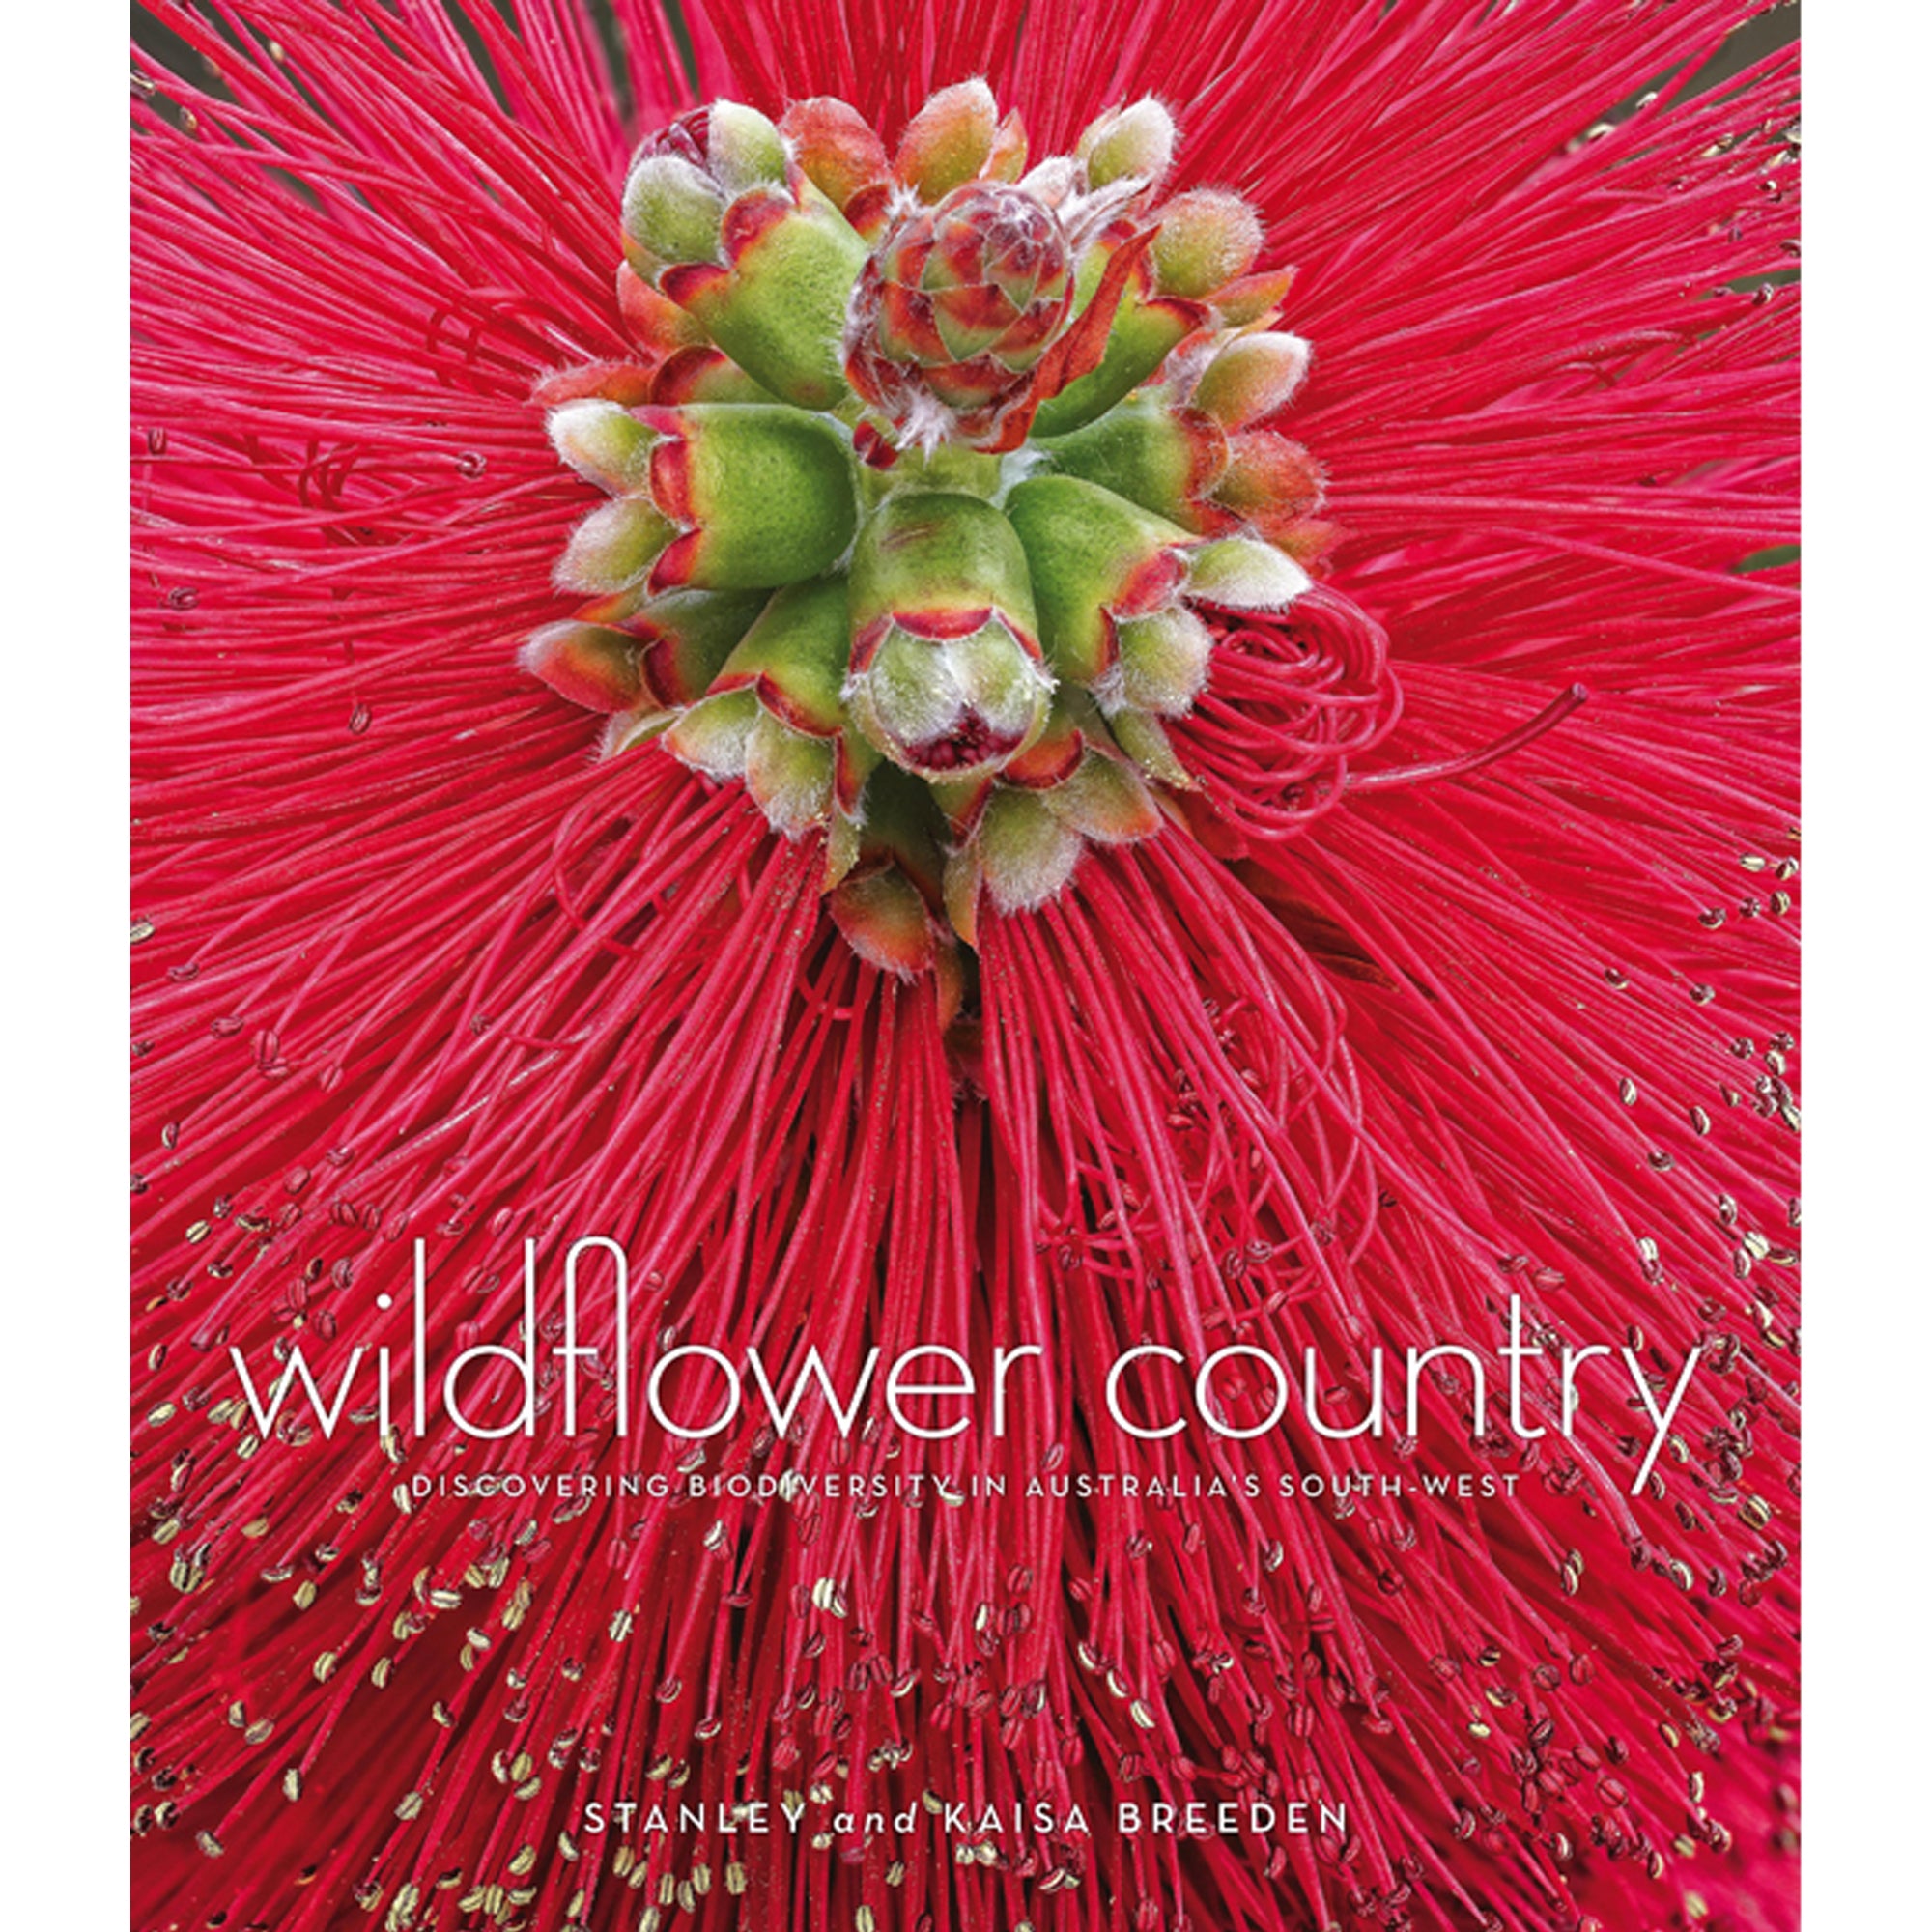 Stanley & Kaisa Breeden -  'Wildflower Country' Large Hardcover Book (m/fac41)